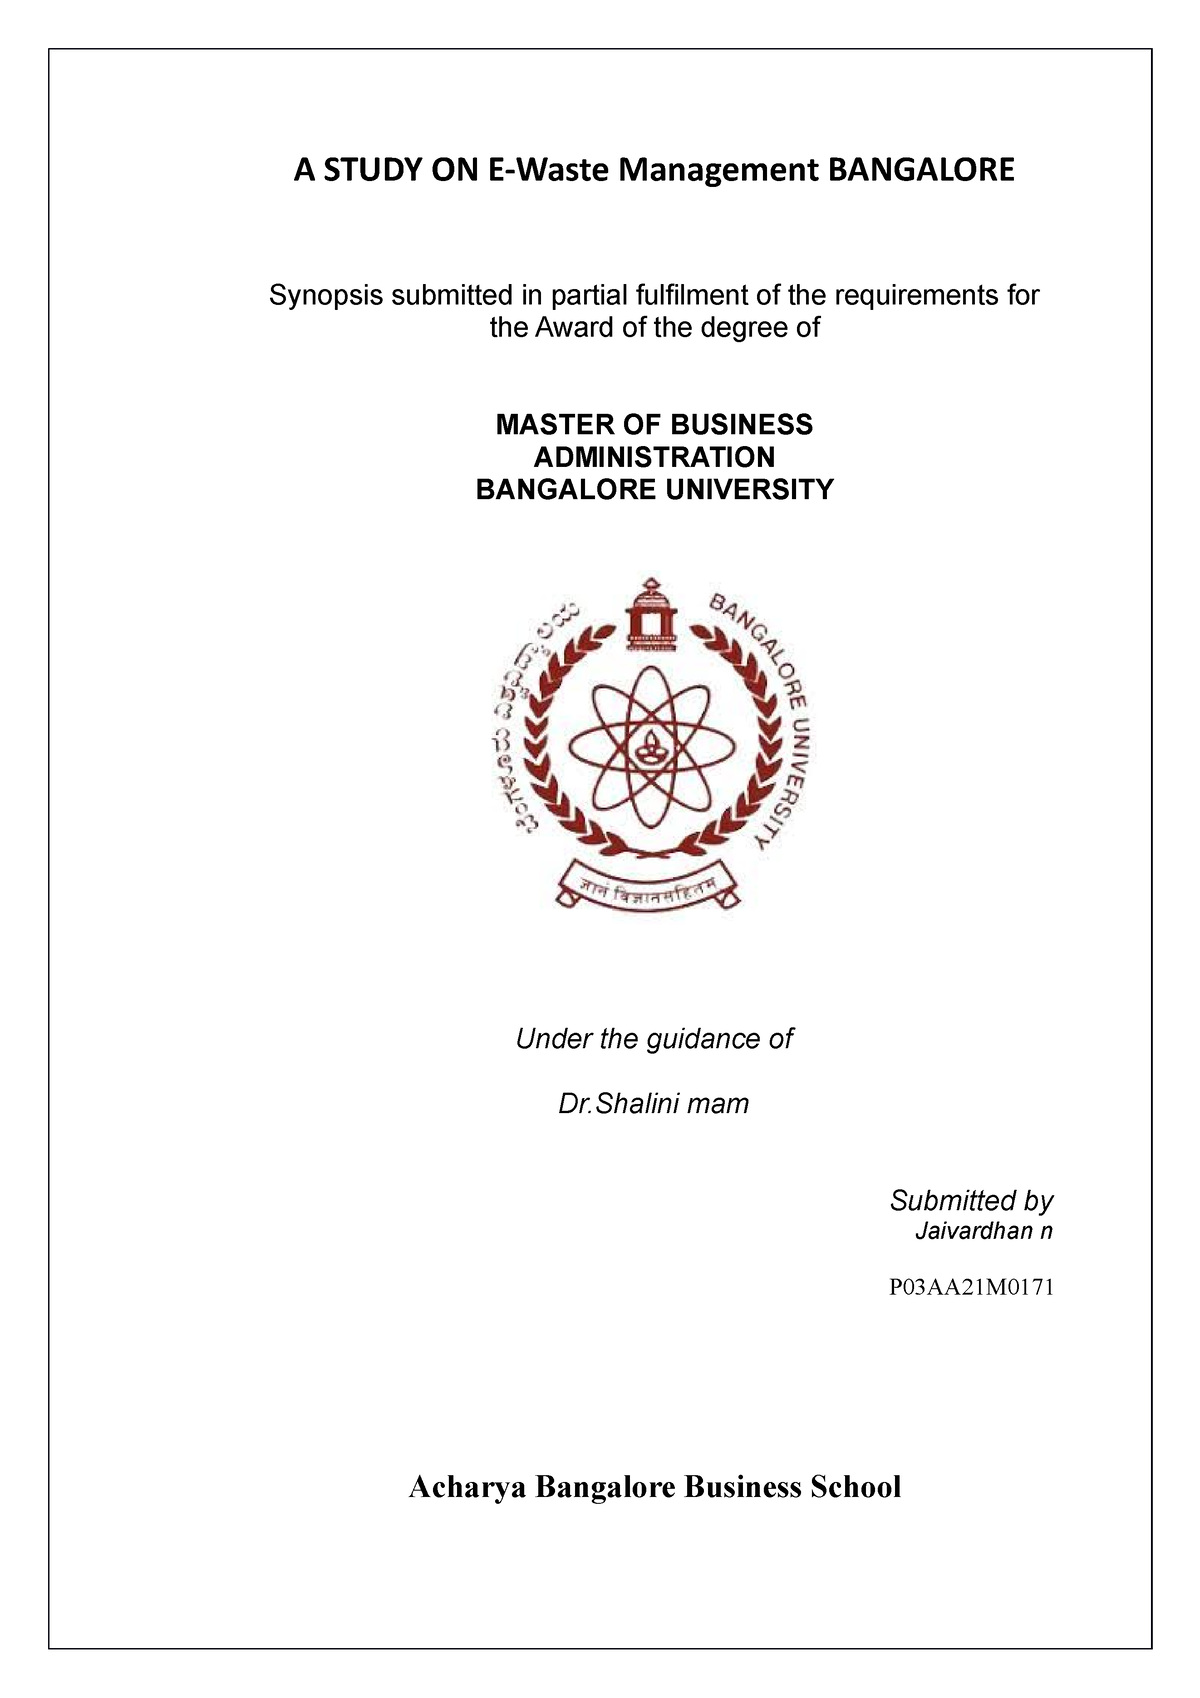 phd thesis on e waste management